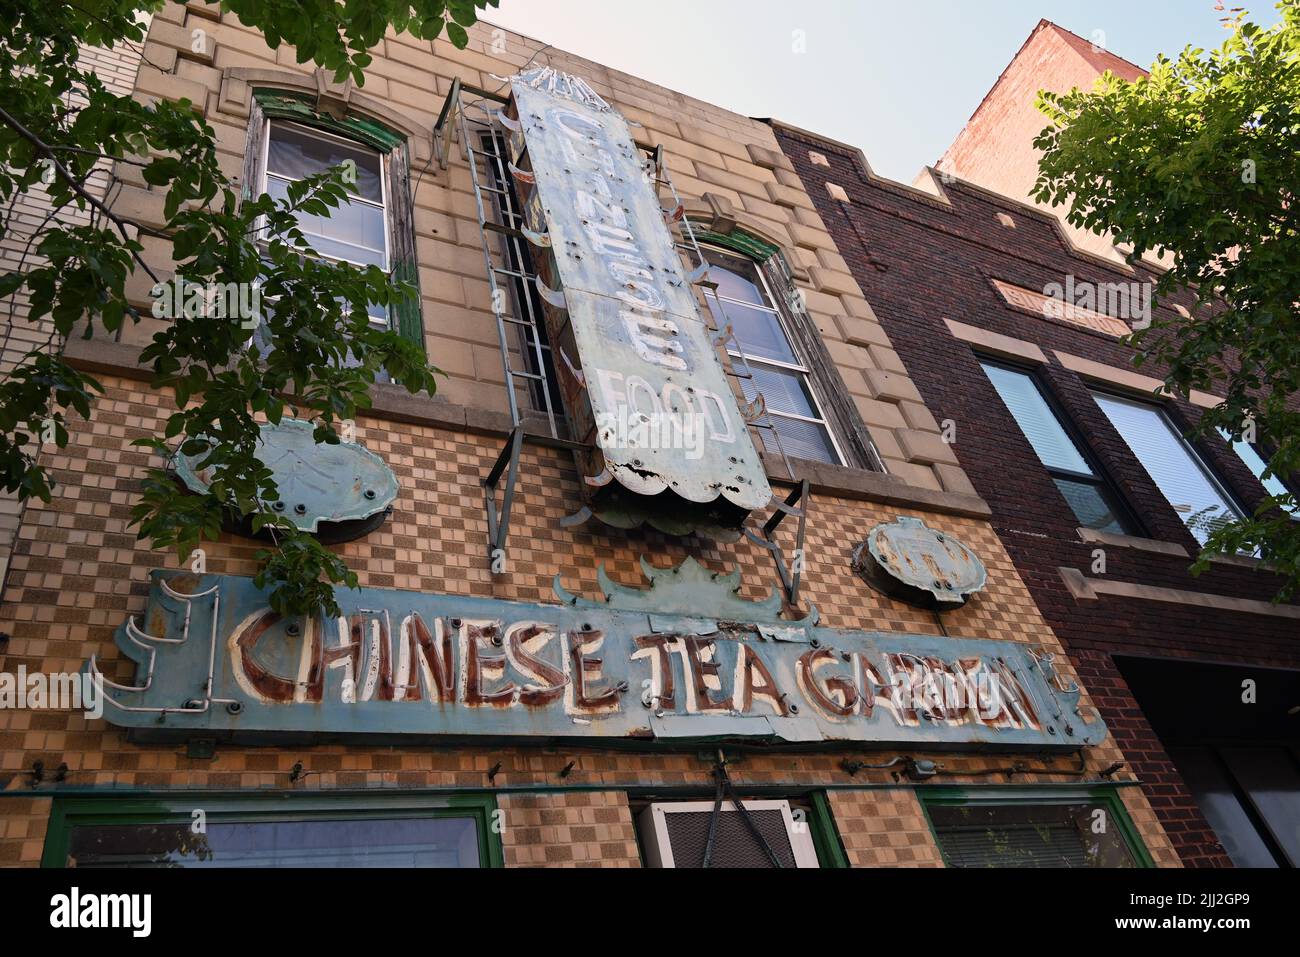 Sign to the Chinese Tea Garden restaurant in the historic downtown shopping district of Decatur, Illinois. Stock Photo